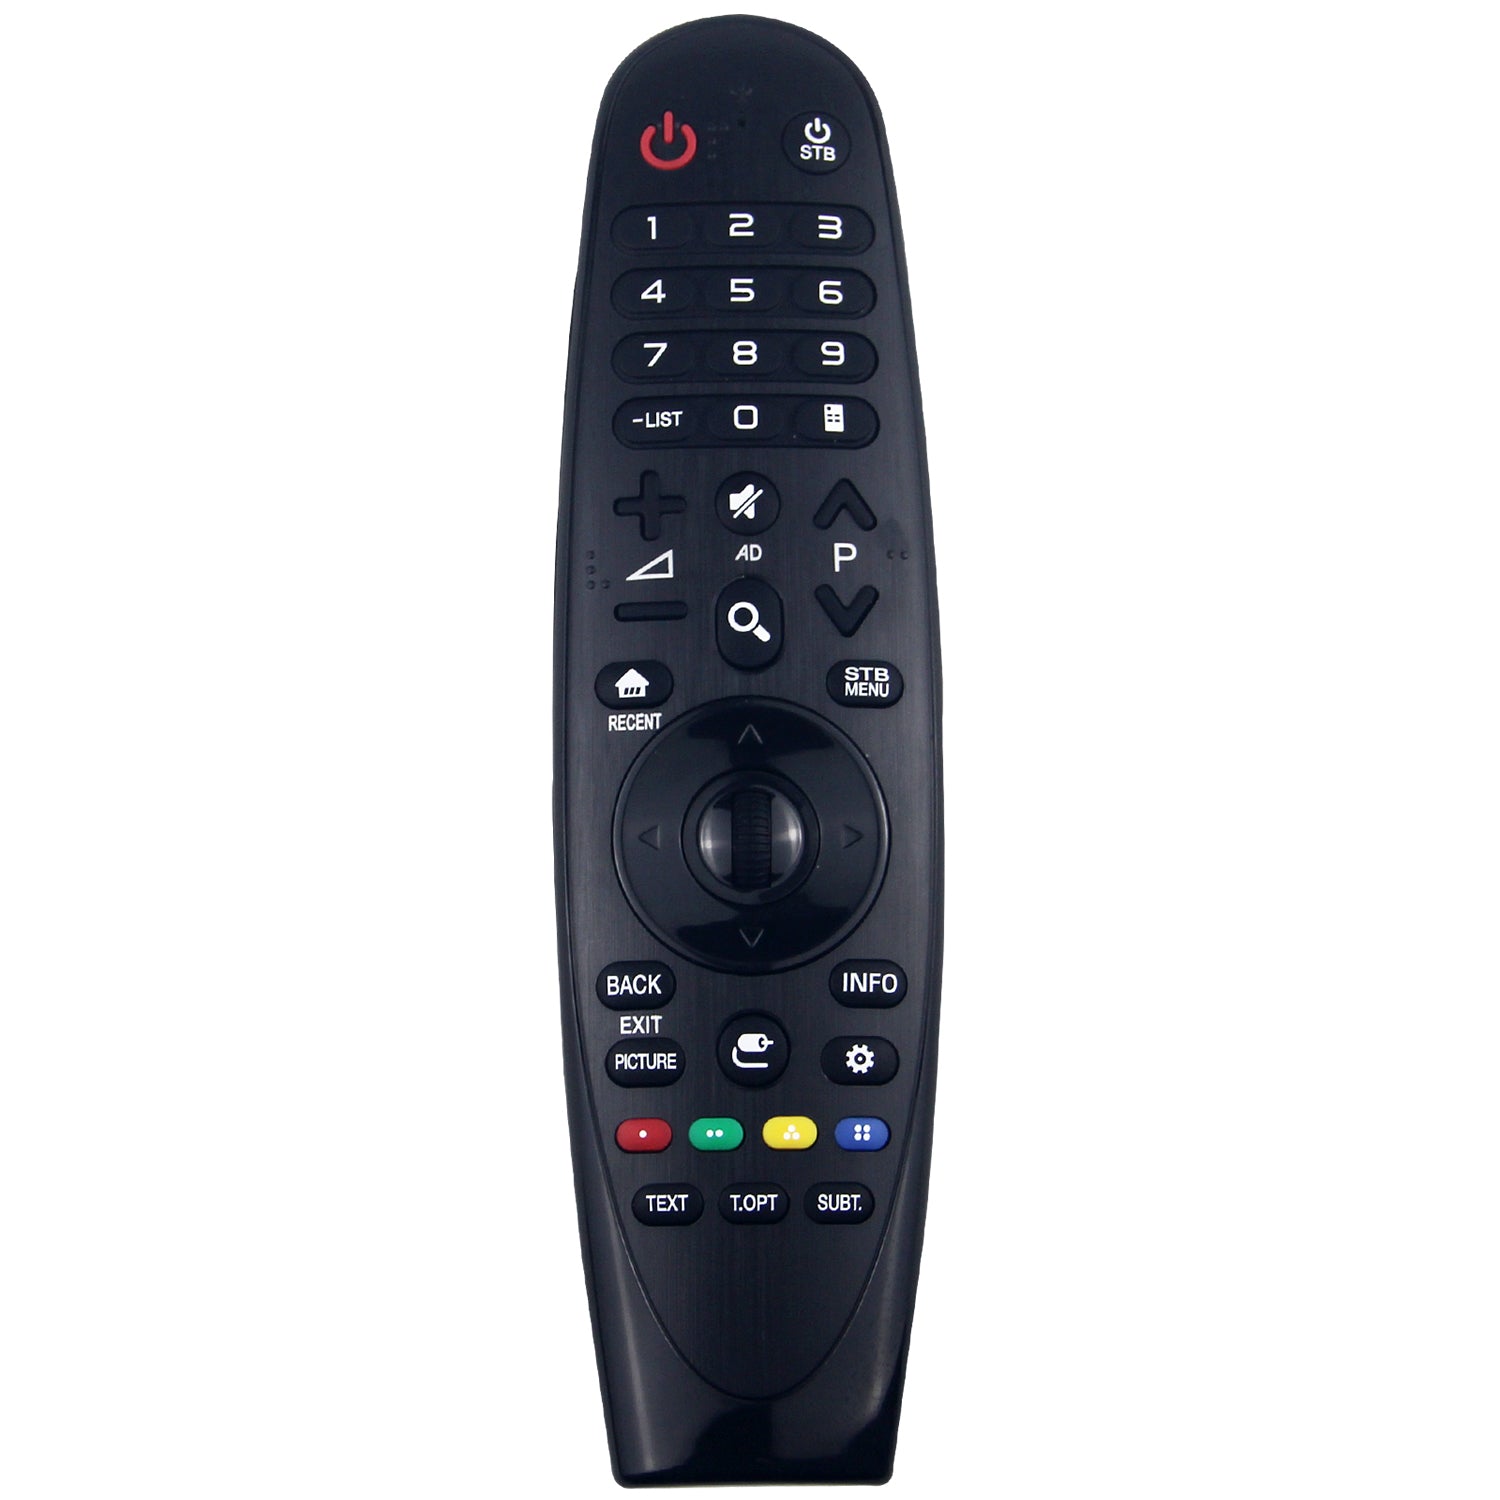 AN-MR650P Remote Control Replacement for LG TV Projector AKB75055911 HU80KA